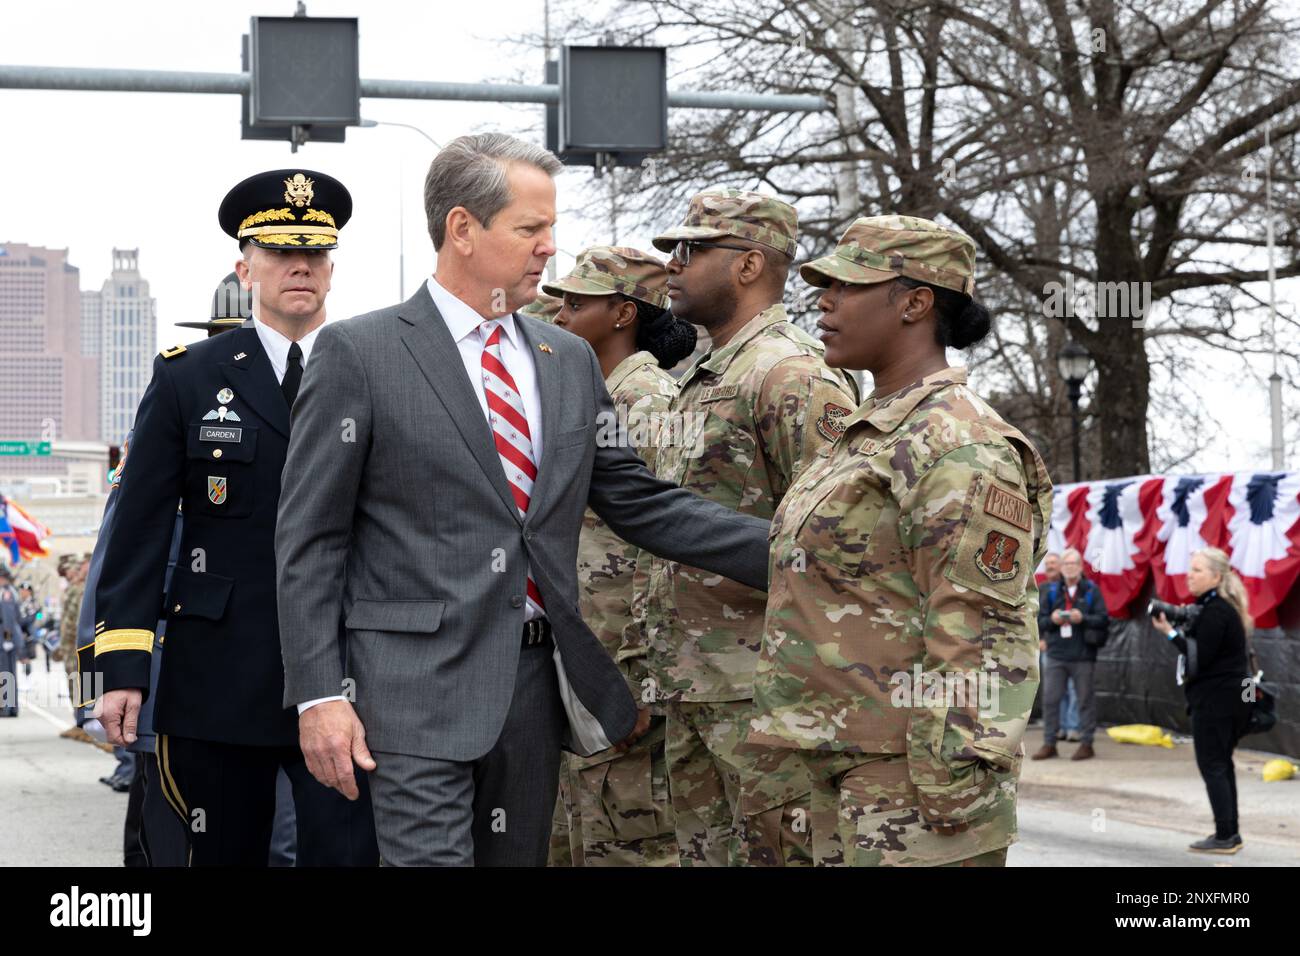 Governor Brian Kemp, U.S. Army Maj. Gen. Tom Carden, The Adjutant General of Georgia, and Col. Chris Wright, Georgia Department of Public Safety Commissioner, review a formation of Soldiers, Airmen, Georgia State Patrol Officers, and Georgia State Defense Force Volunteers Jan. 12, 2023 at the Georgia State Convocation Center near Atlanta, Georgia. Stock Photo